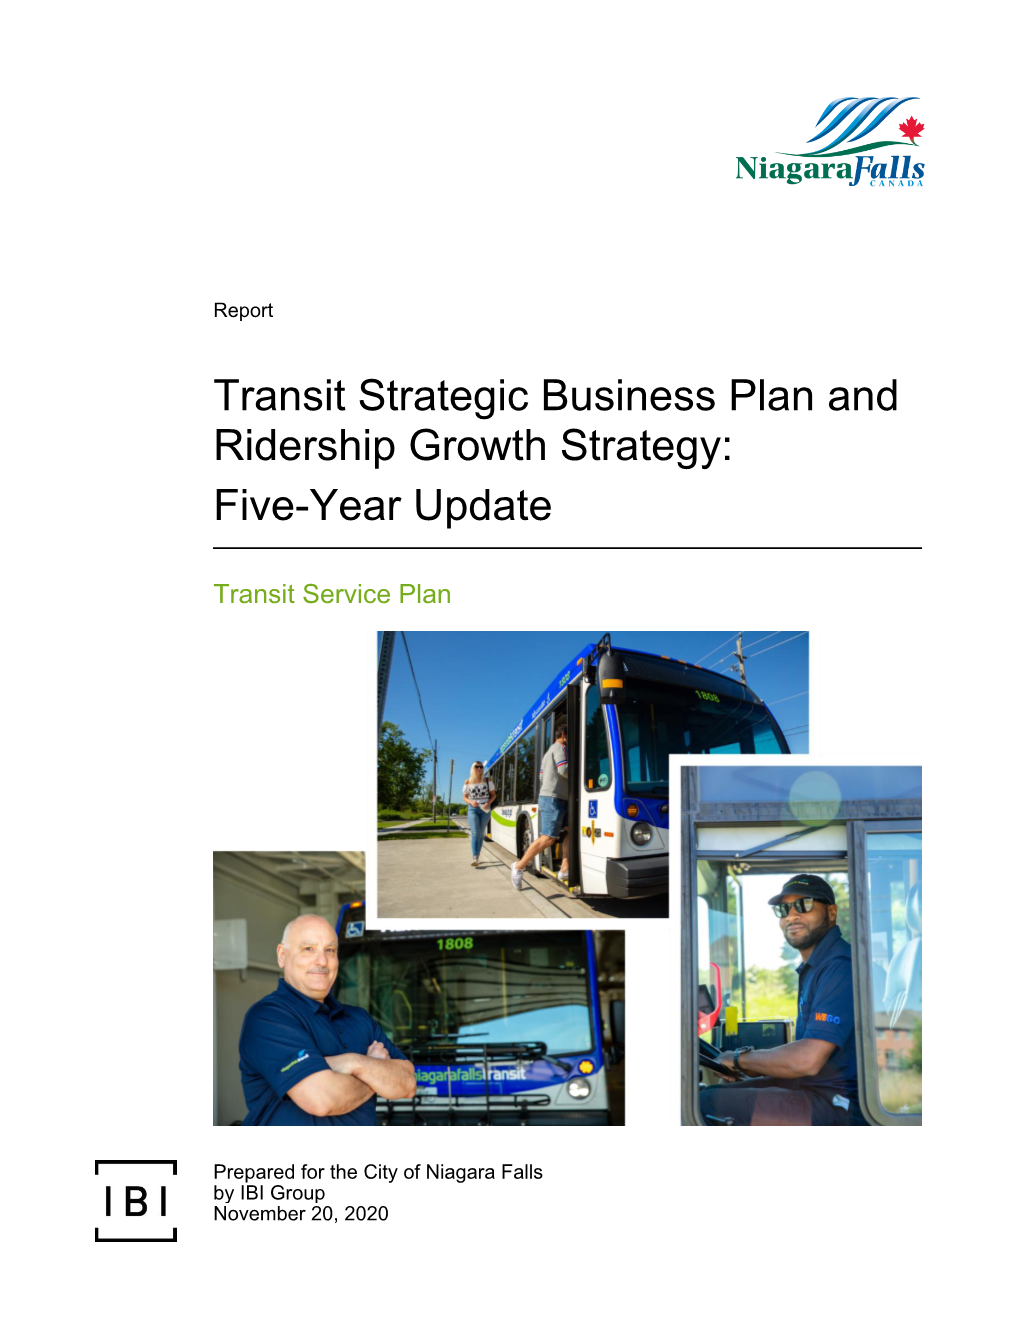 Transit Strategic Business Plan and Ridership Growth Strategy: Five-Year Update